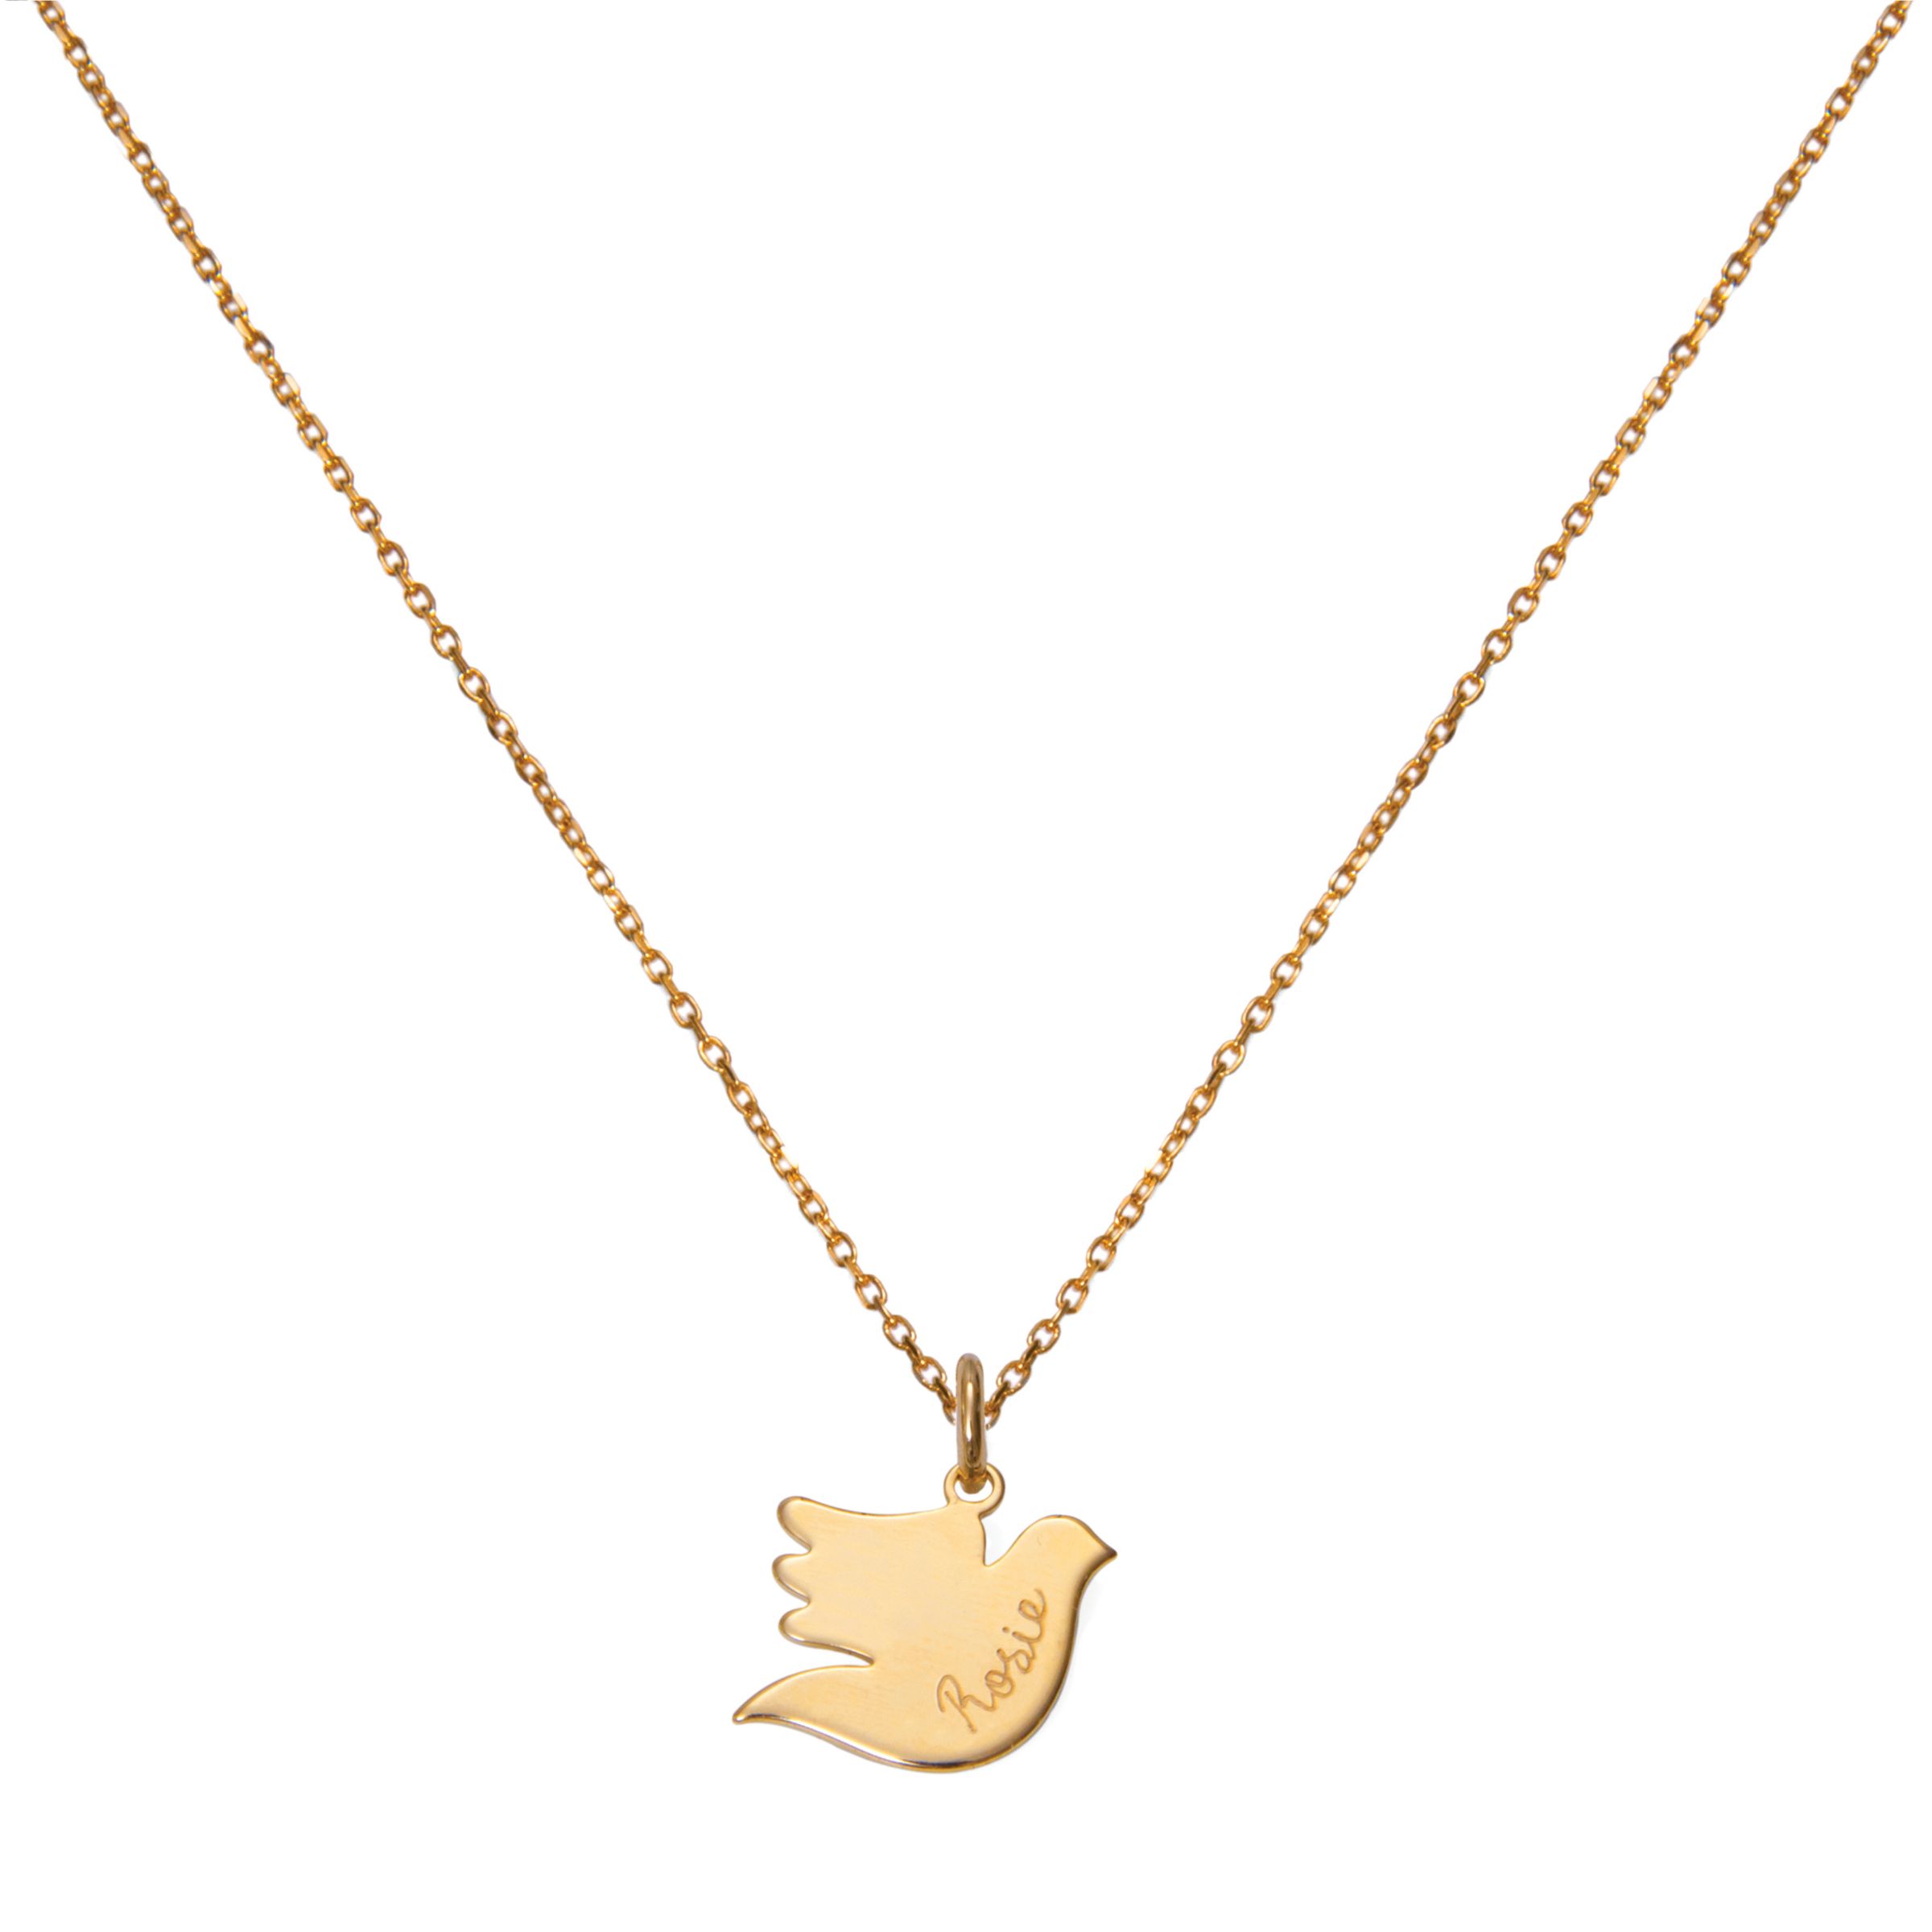 Merci Maman Personalised Dove Pendant Chain Necklace, Gold